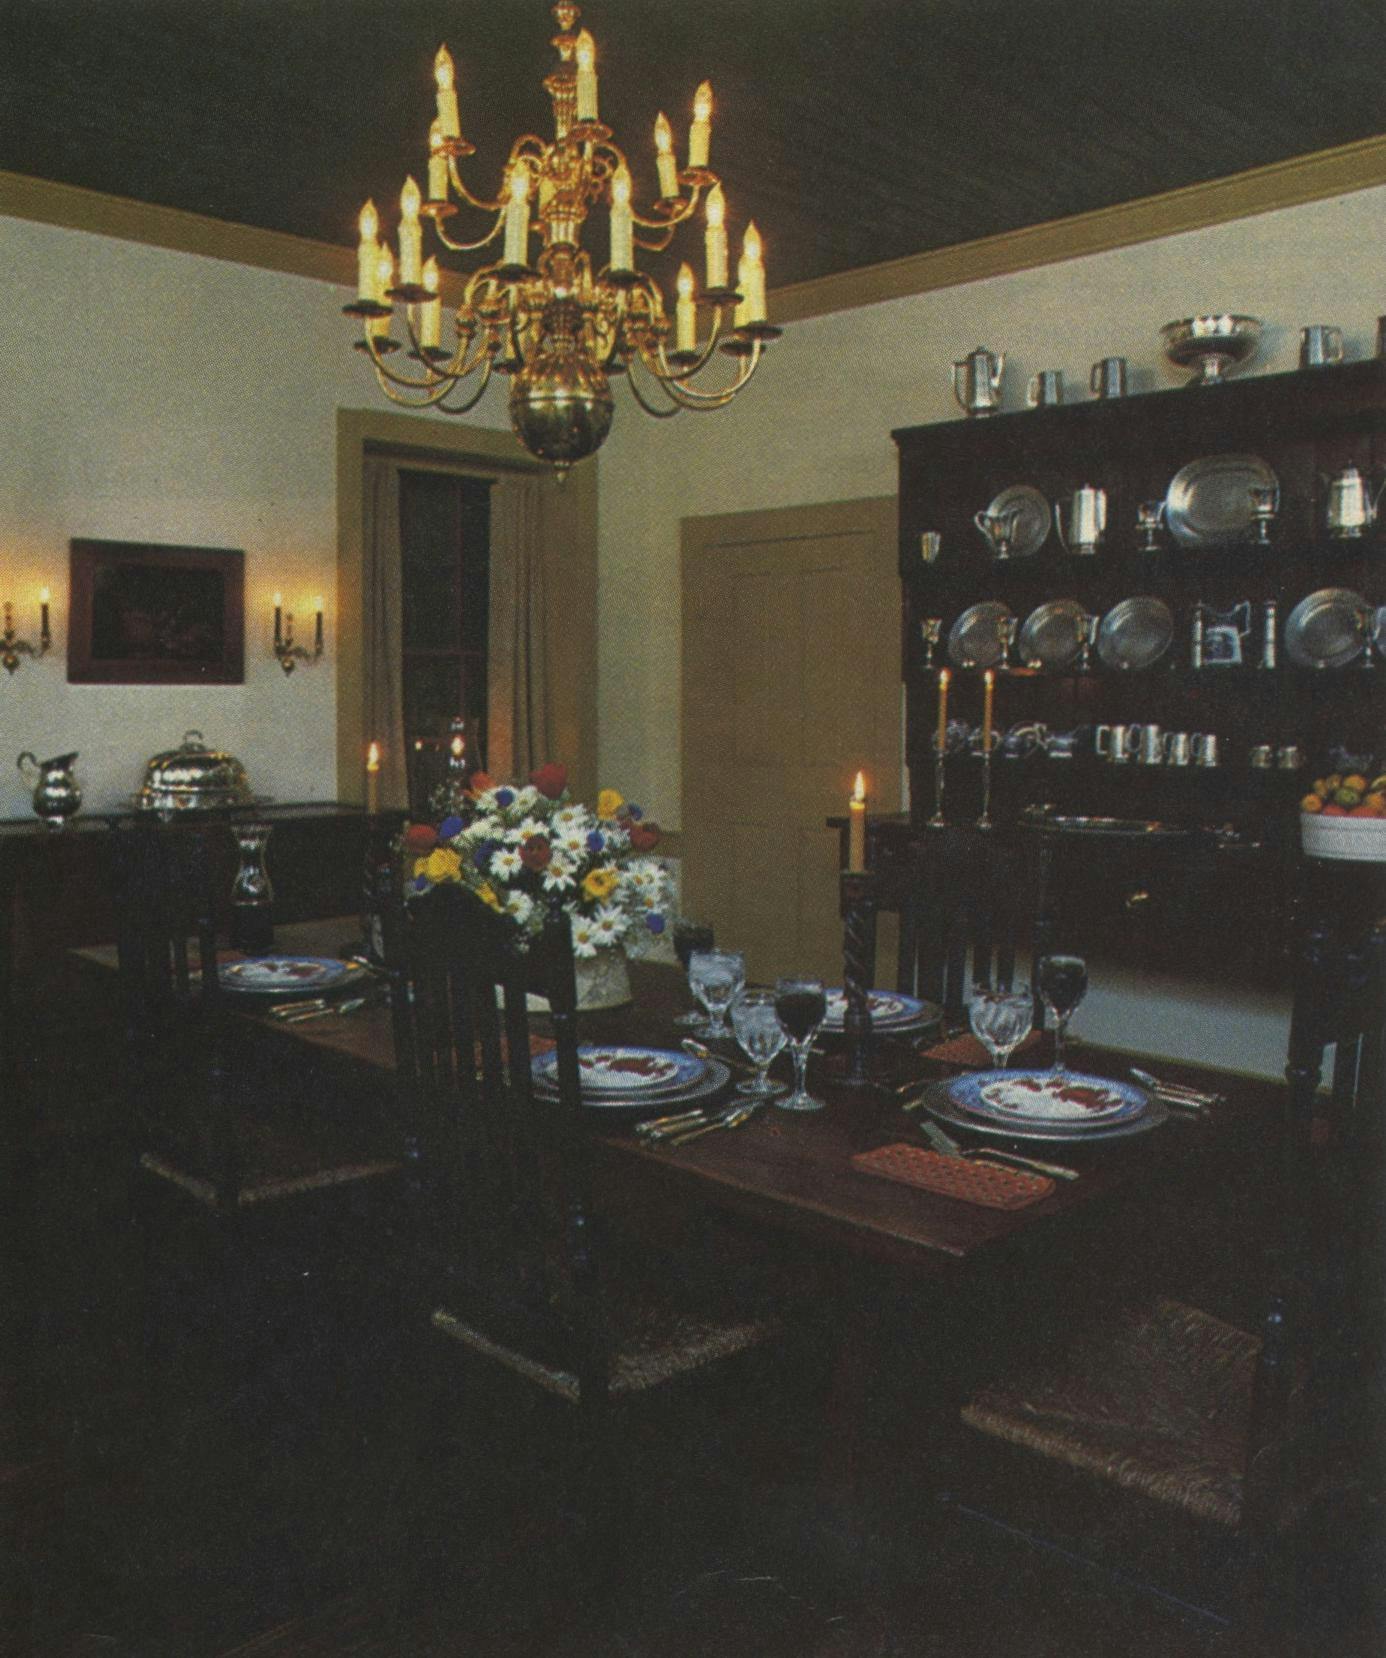 The formal dining room houses a wealth of collectibles, like an early-nineteenth-century brass chandelier from Philadelphia and a late-eighteenth-century Welsh dresser.